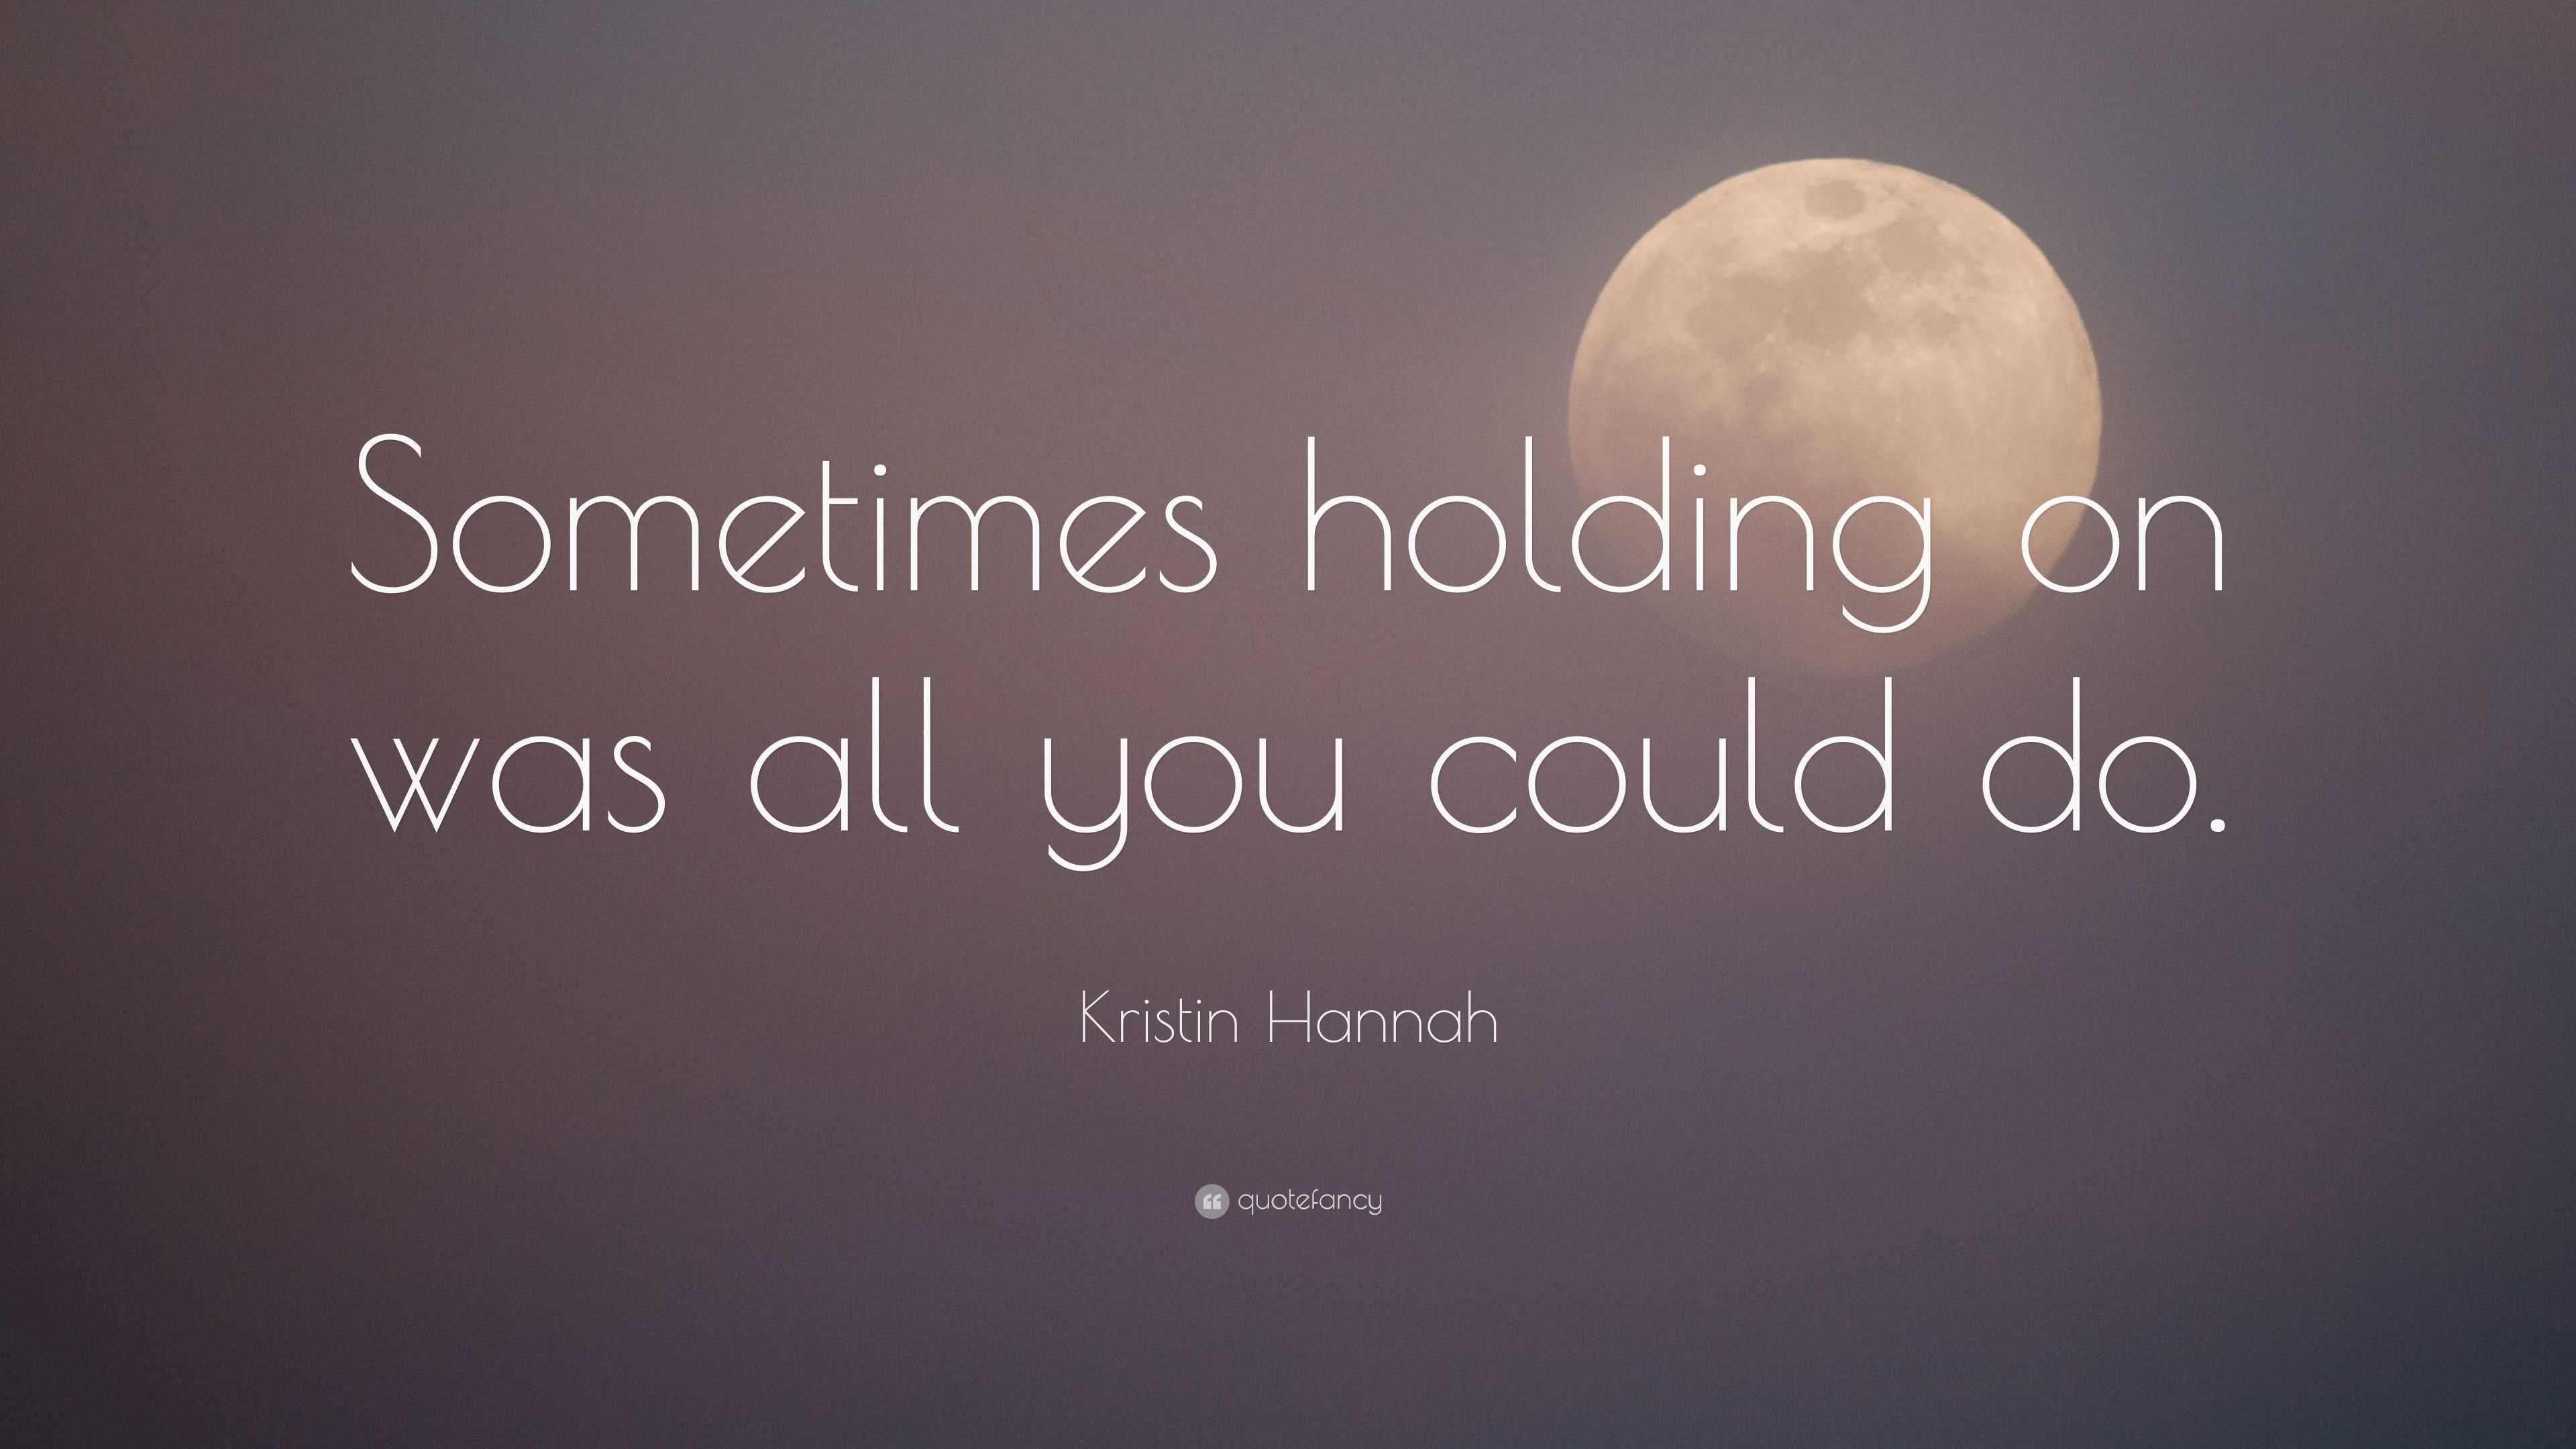 Kristin Hannah Quote: “Sometimes holding on was all you could do.”